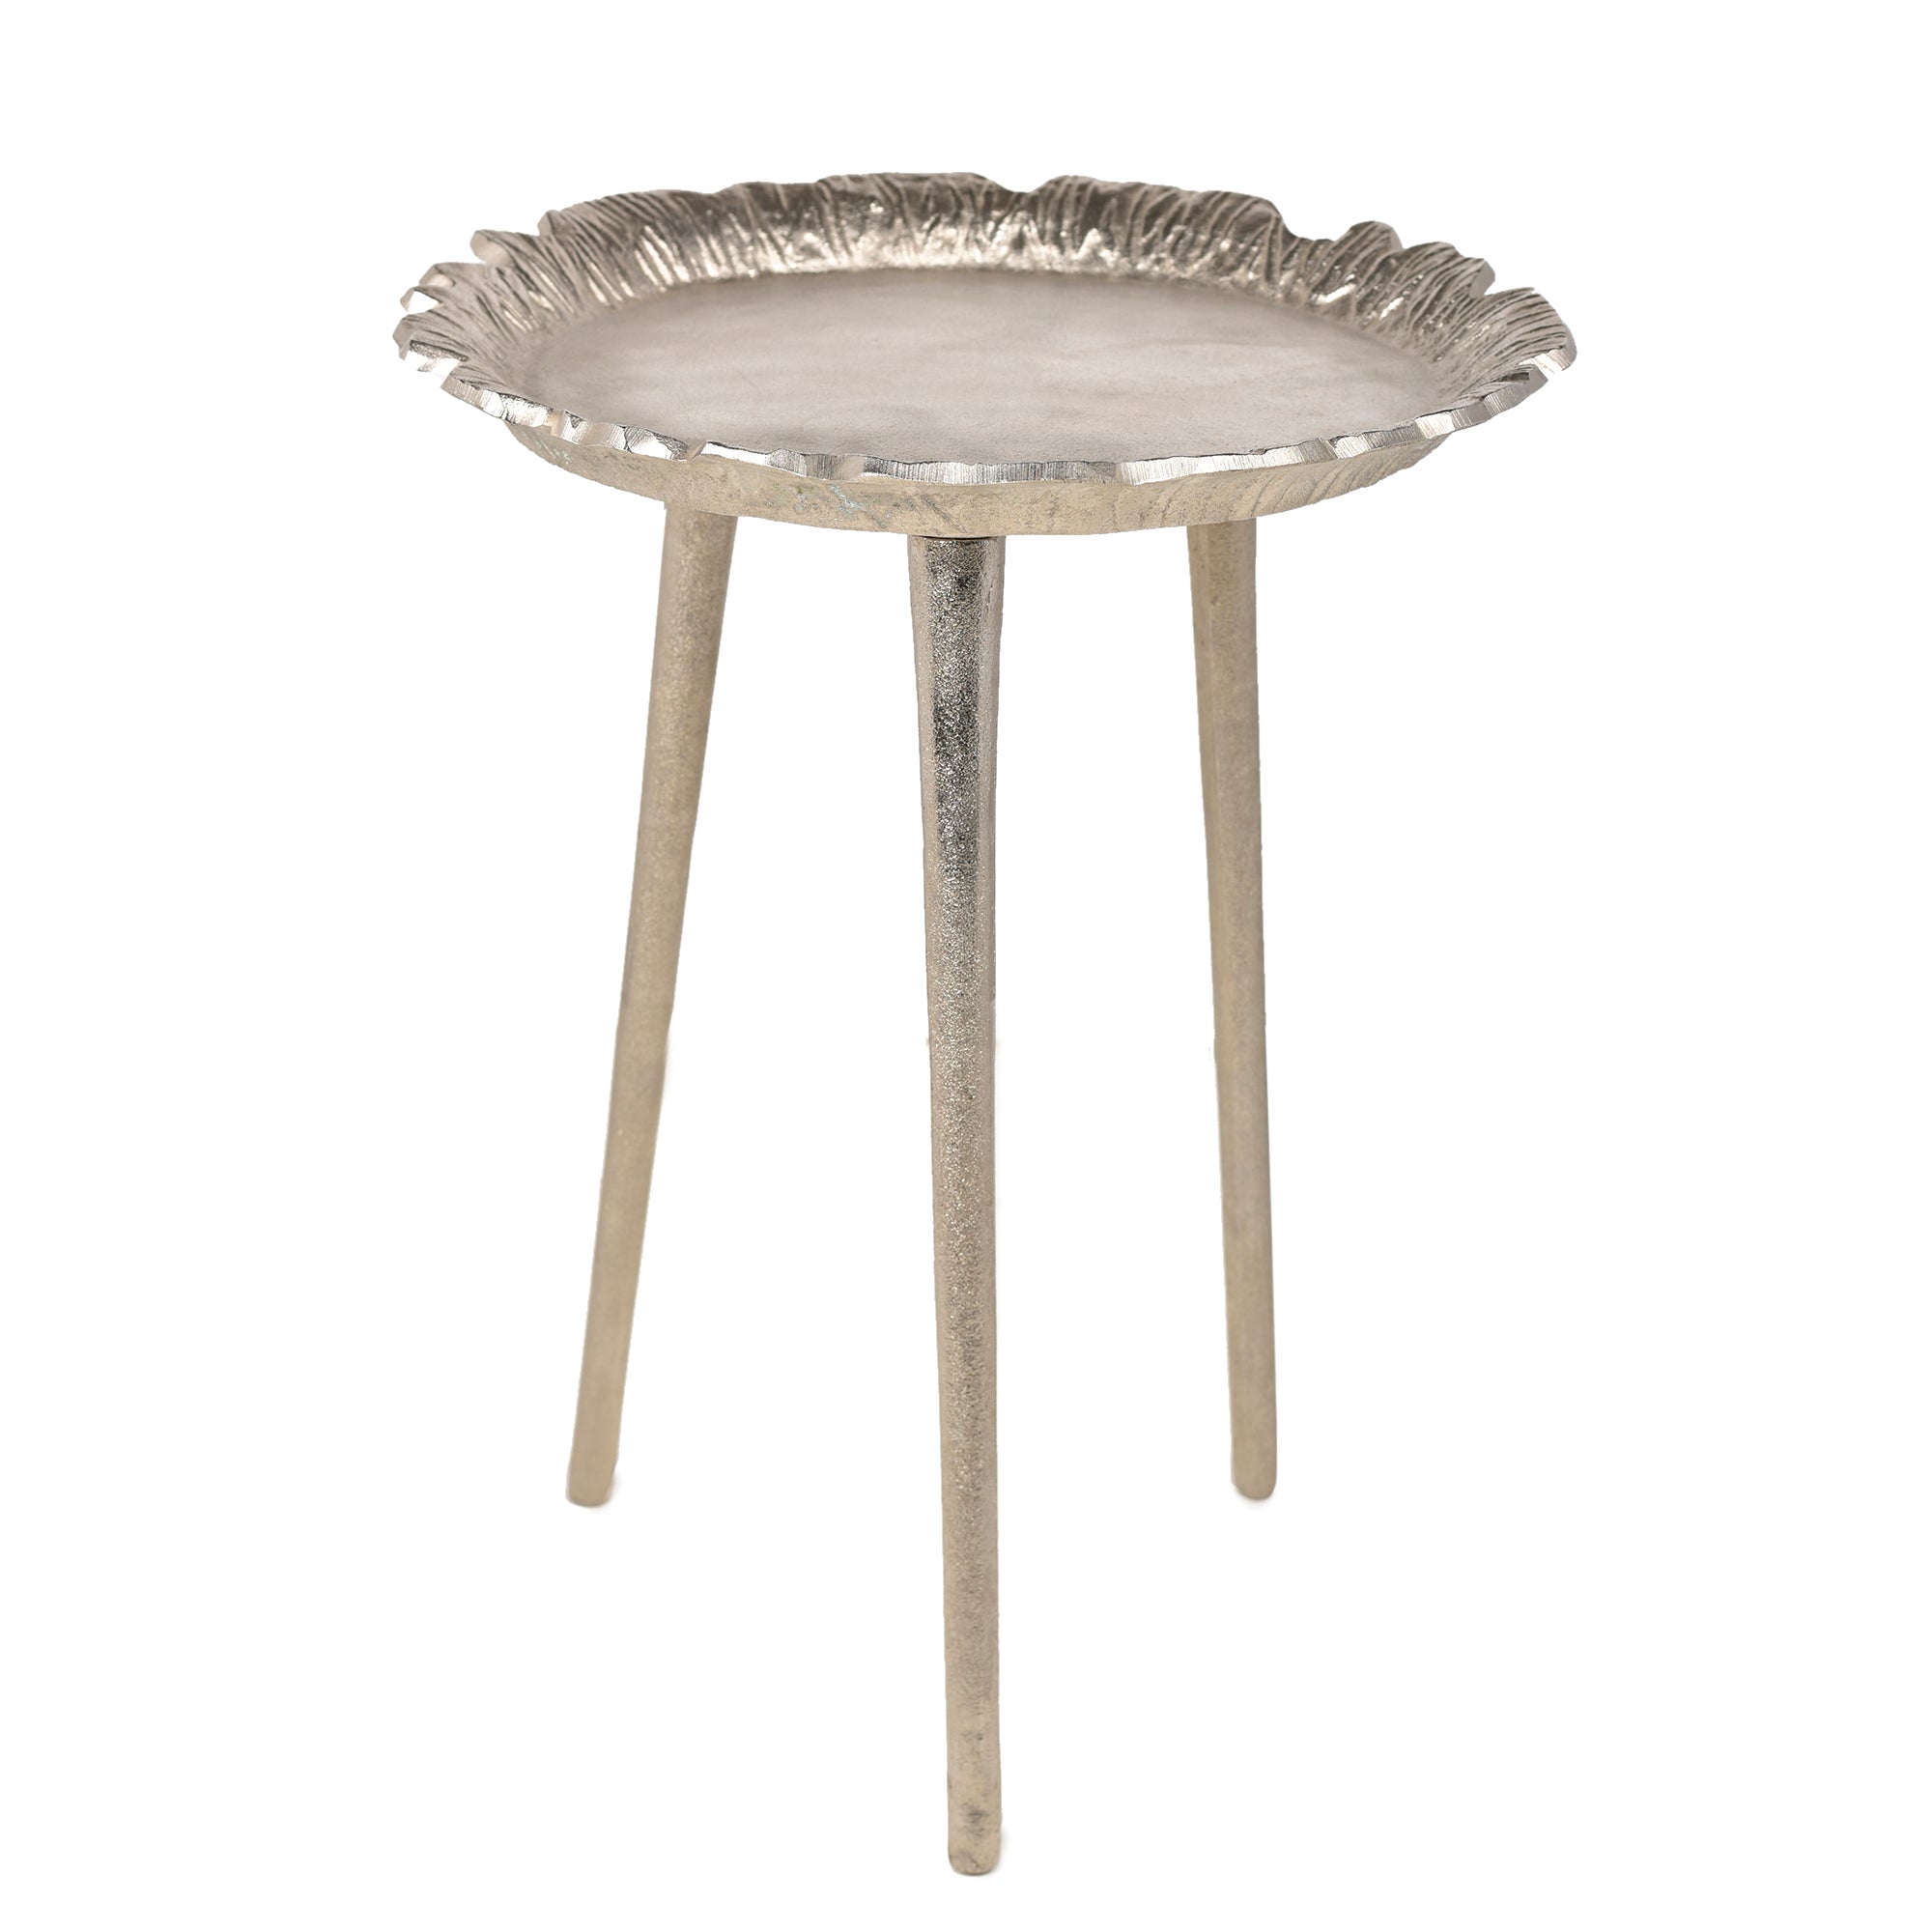 Round Flower Plate Nickel Finish Accent Table 19x19x23 inch